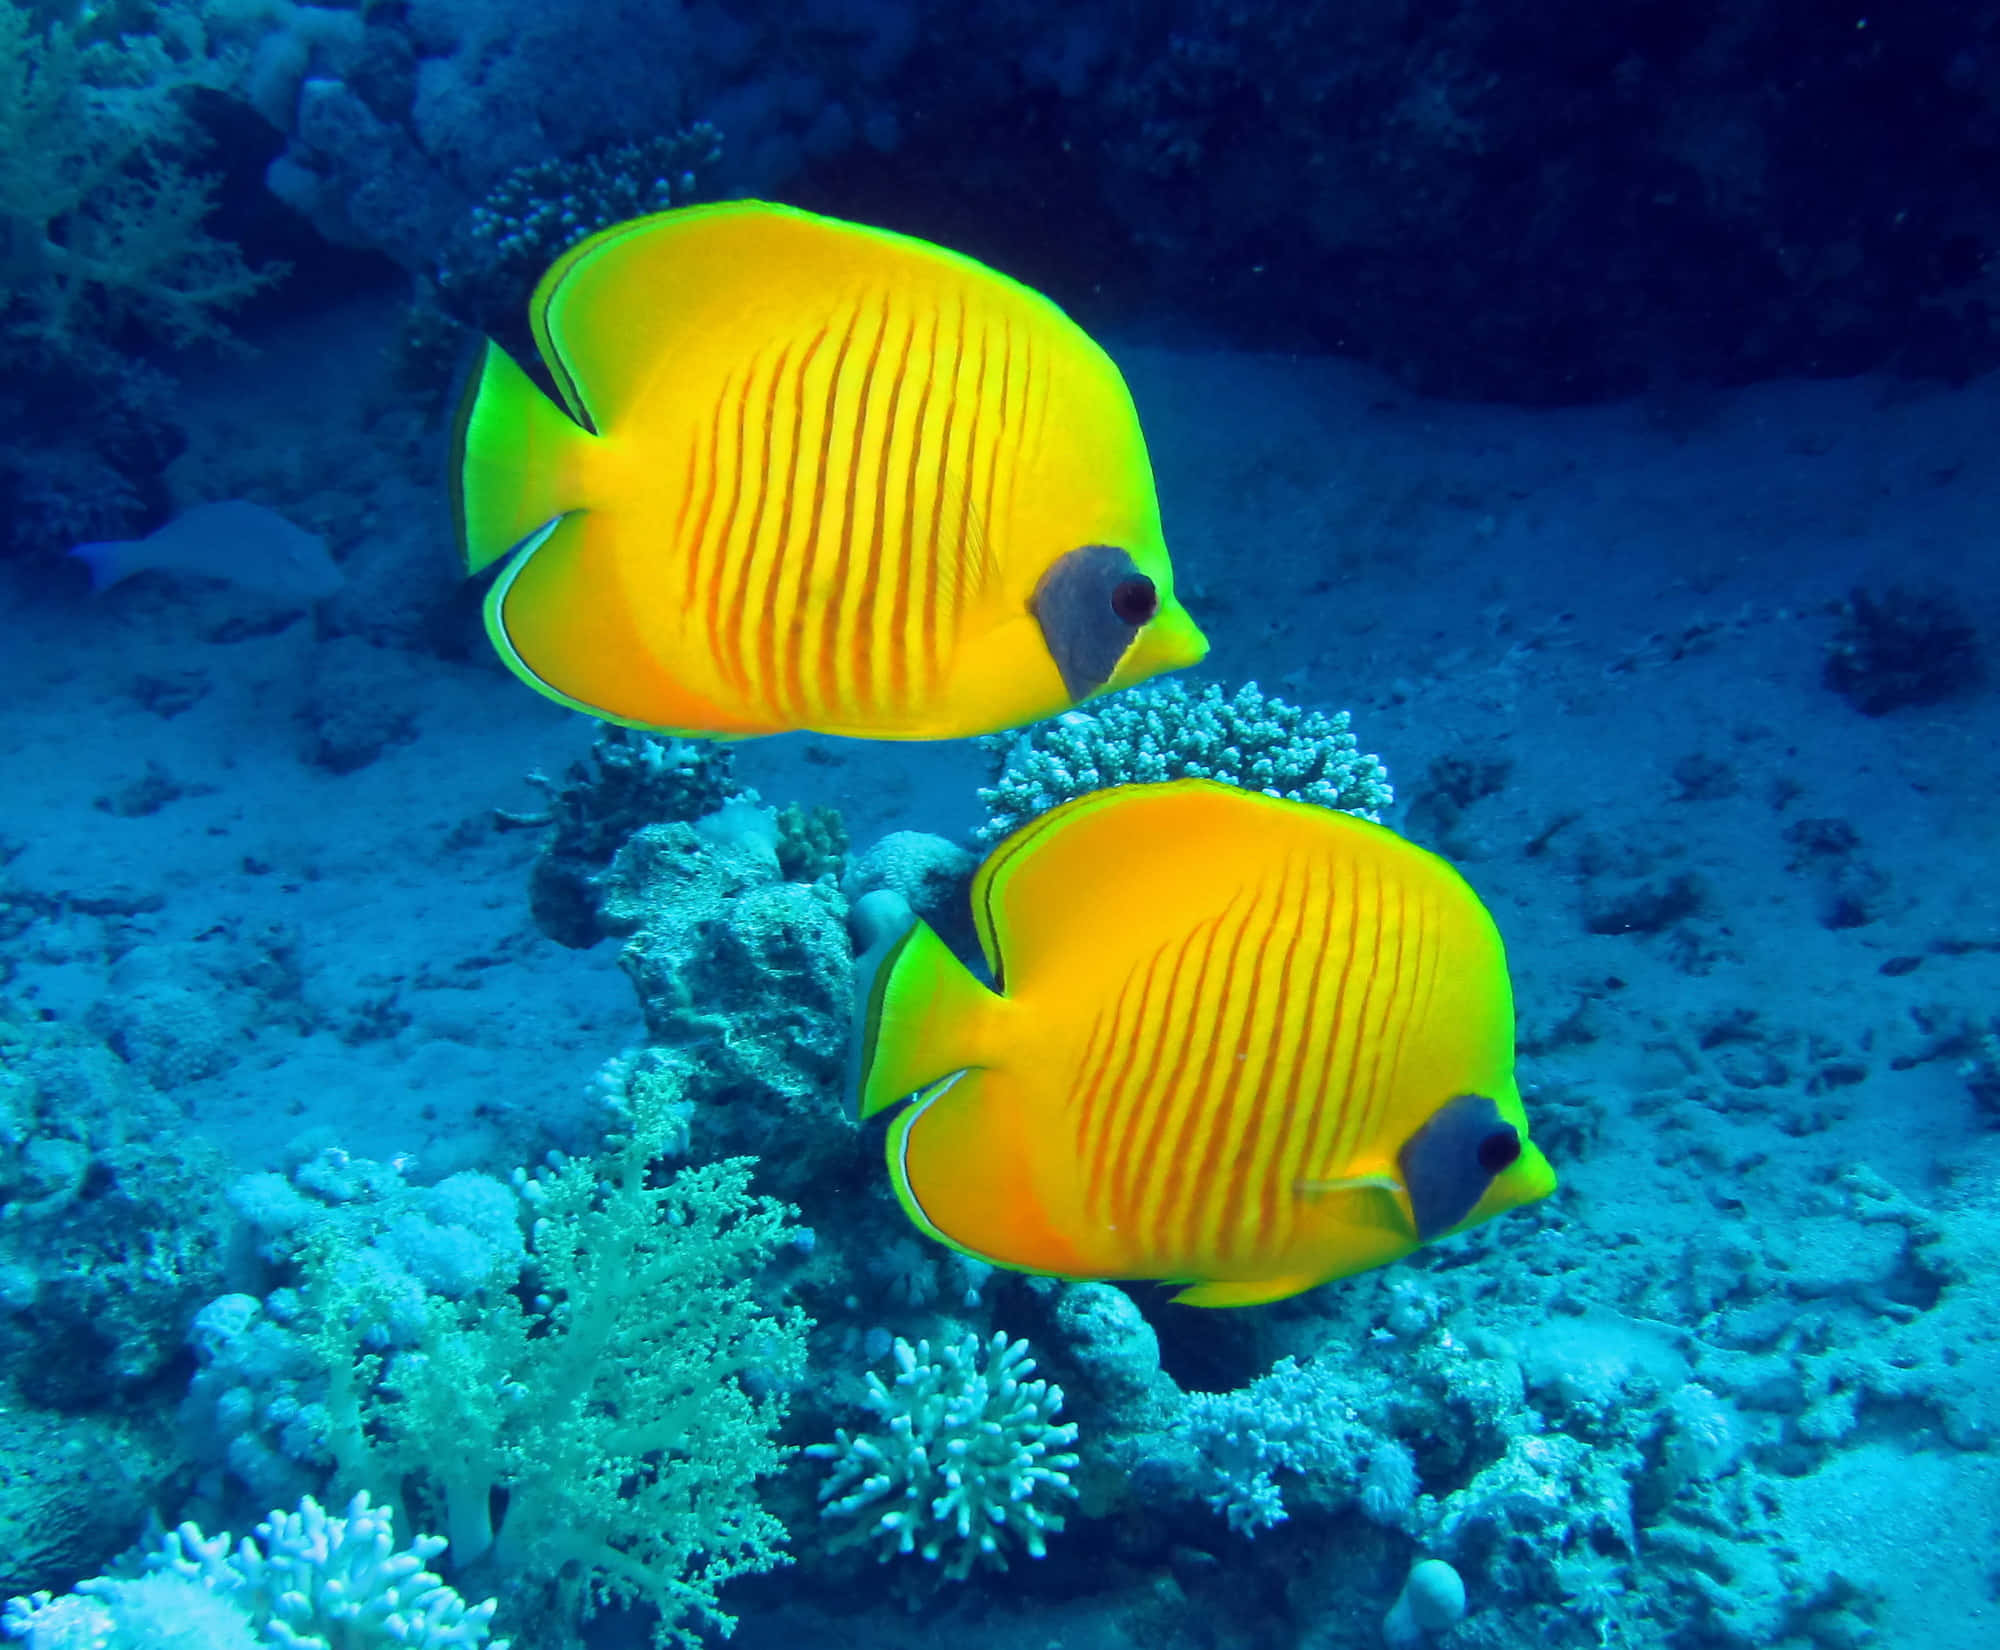 Caption: Vibrant Butterflyfish Swimming In Crystal Clear Waters Wallpaper